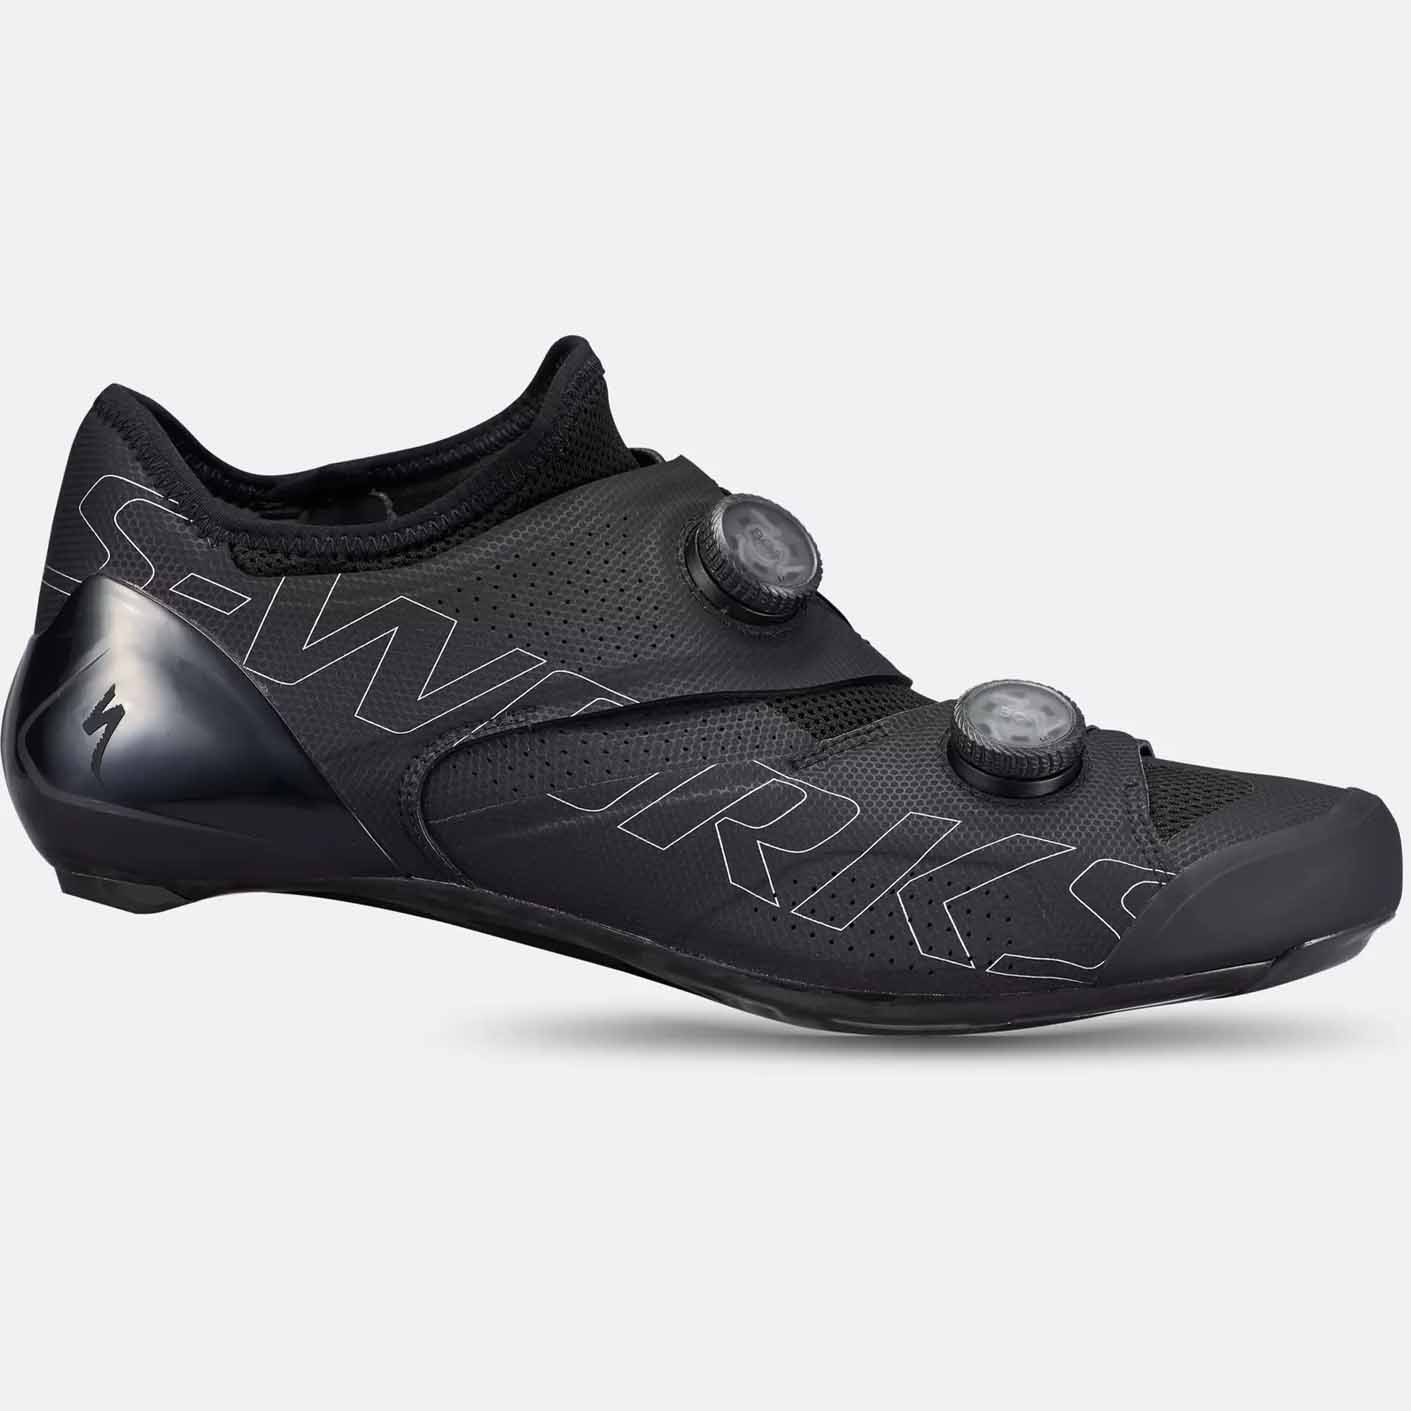 S-Works Ares Road Shoes in all black 